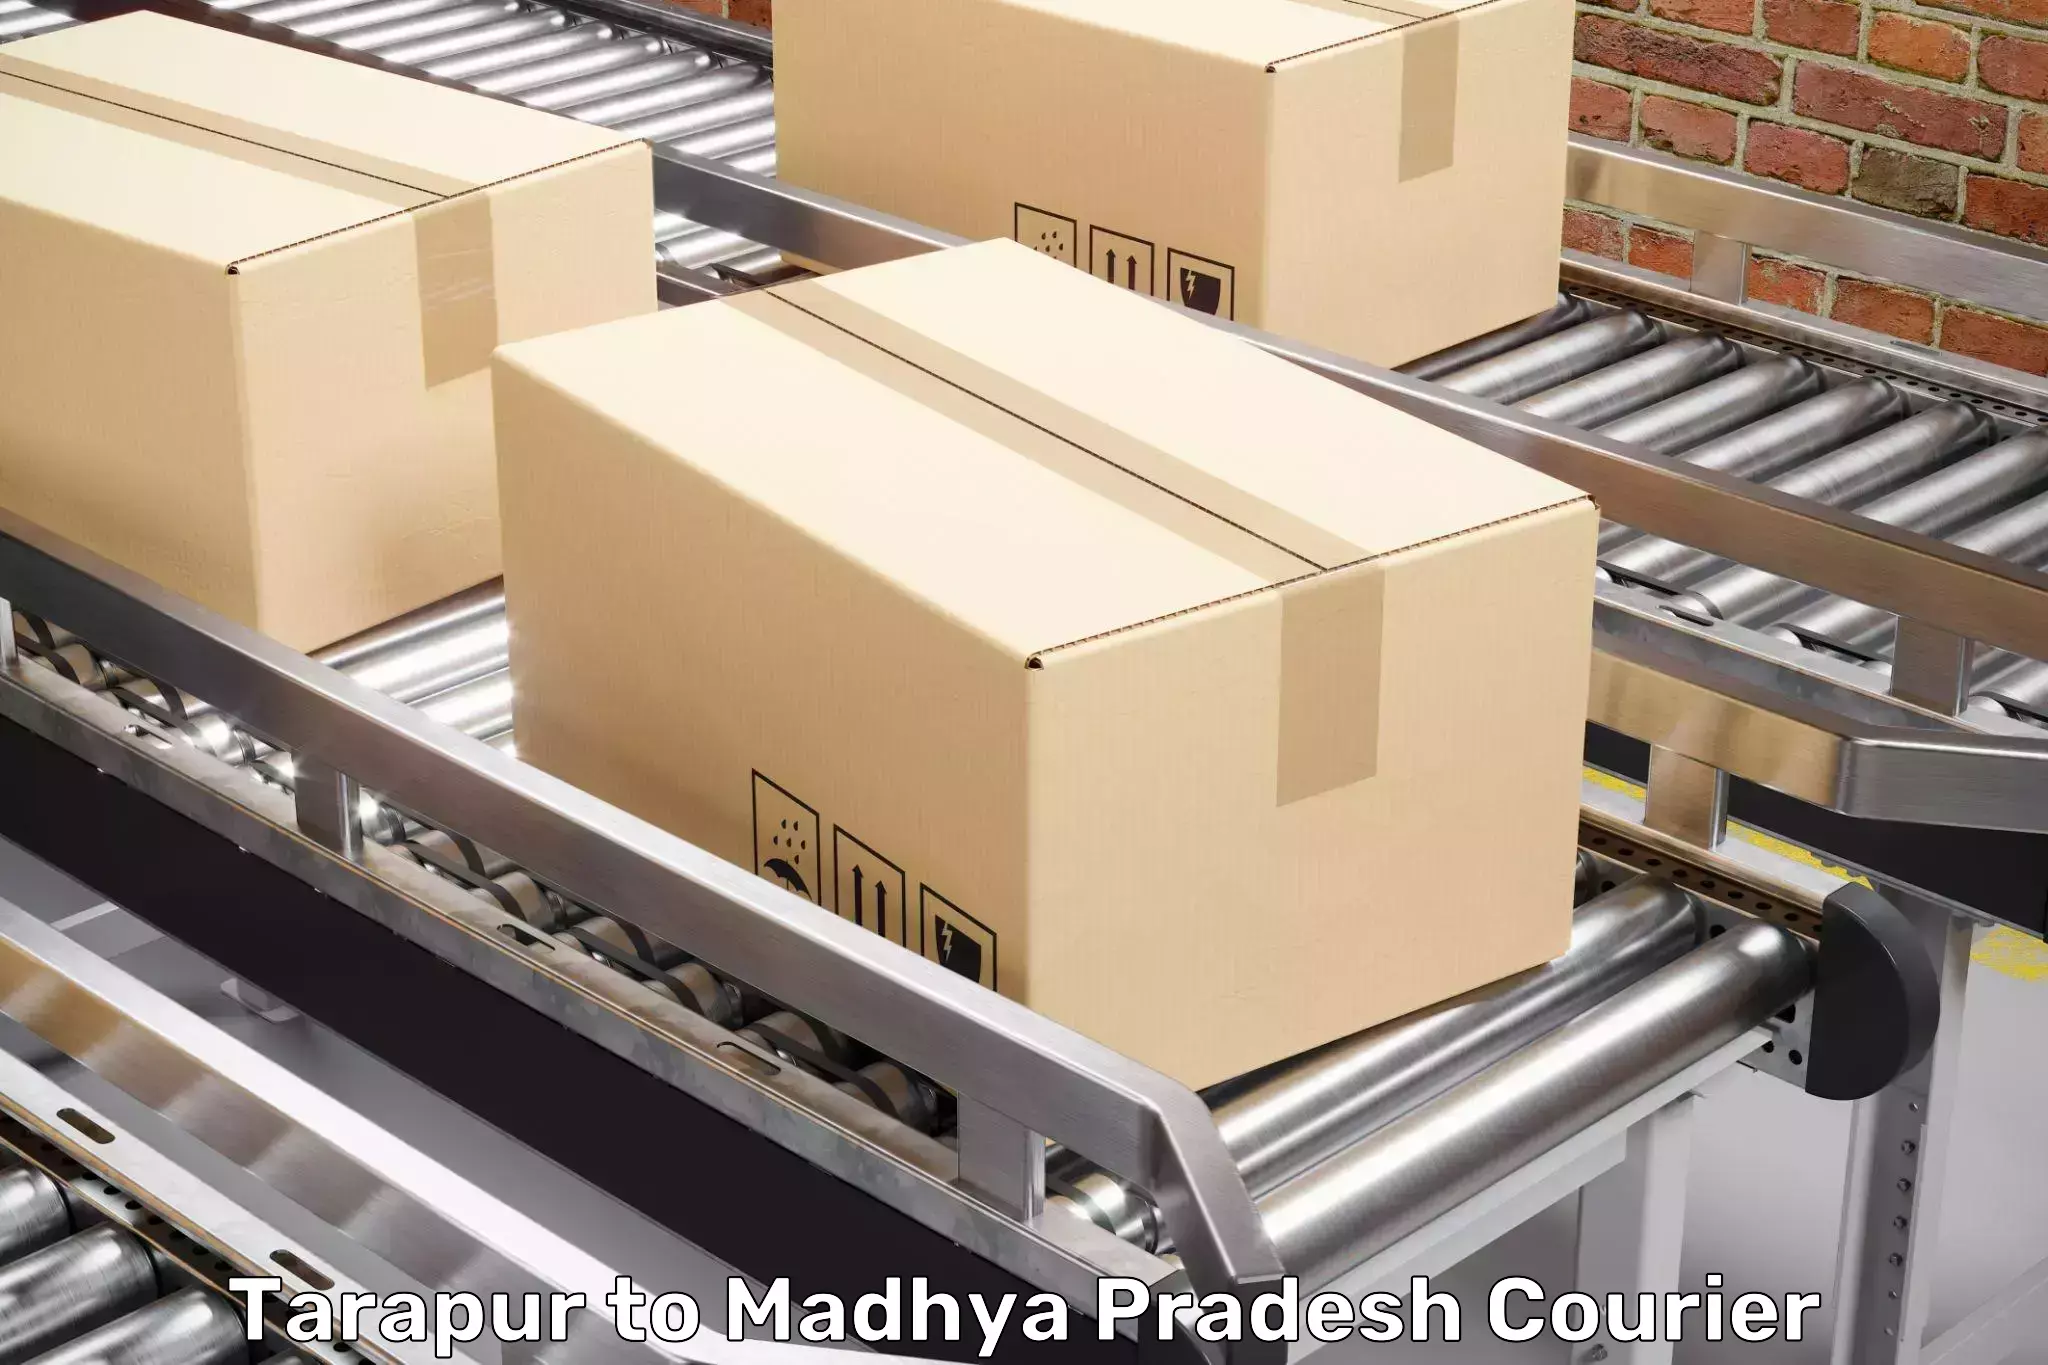 Furniture delivery service Tarapur to Bhopal